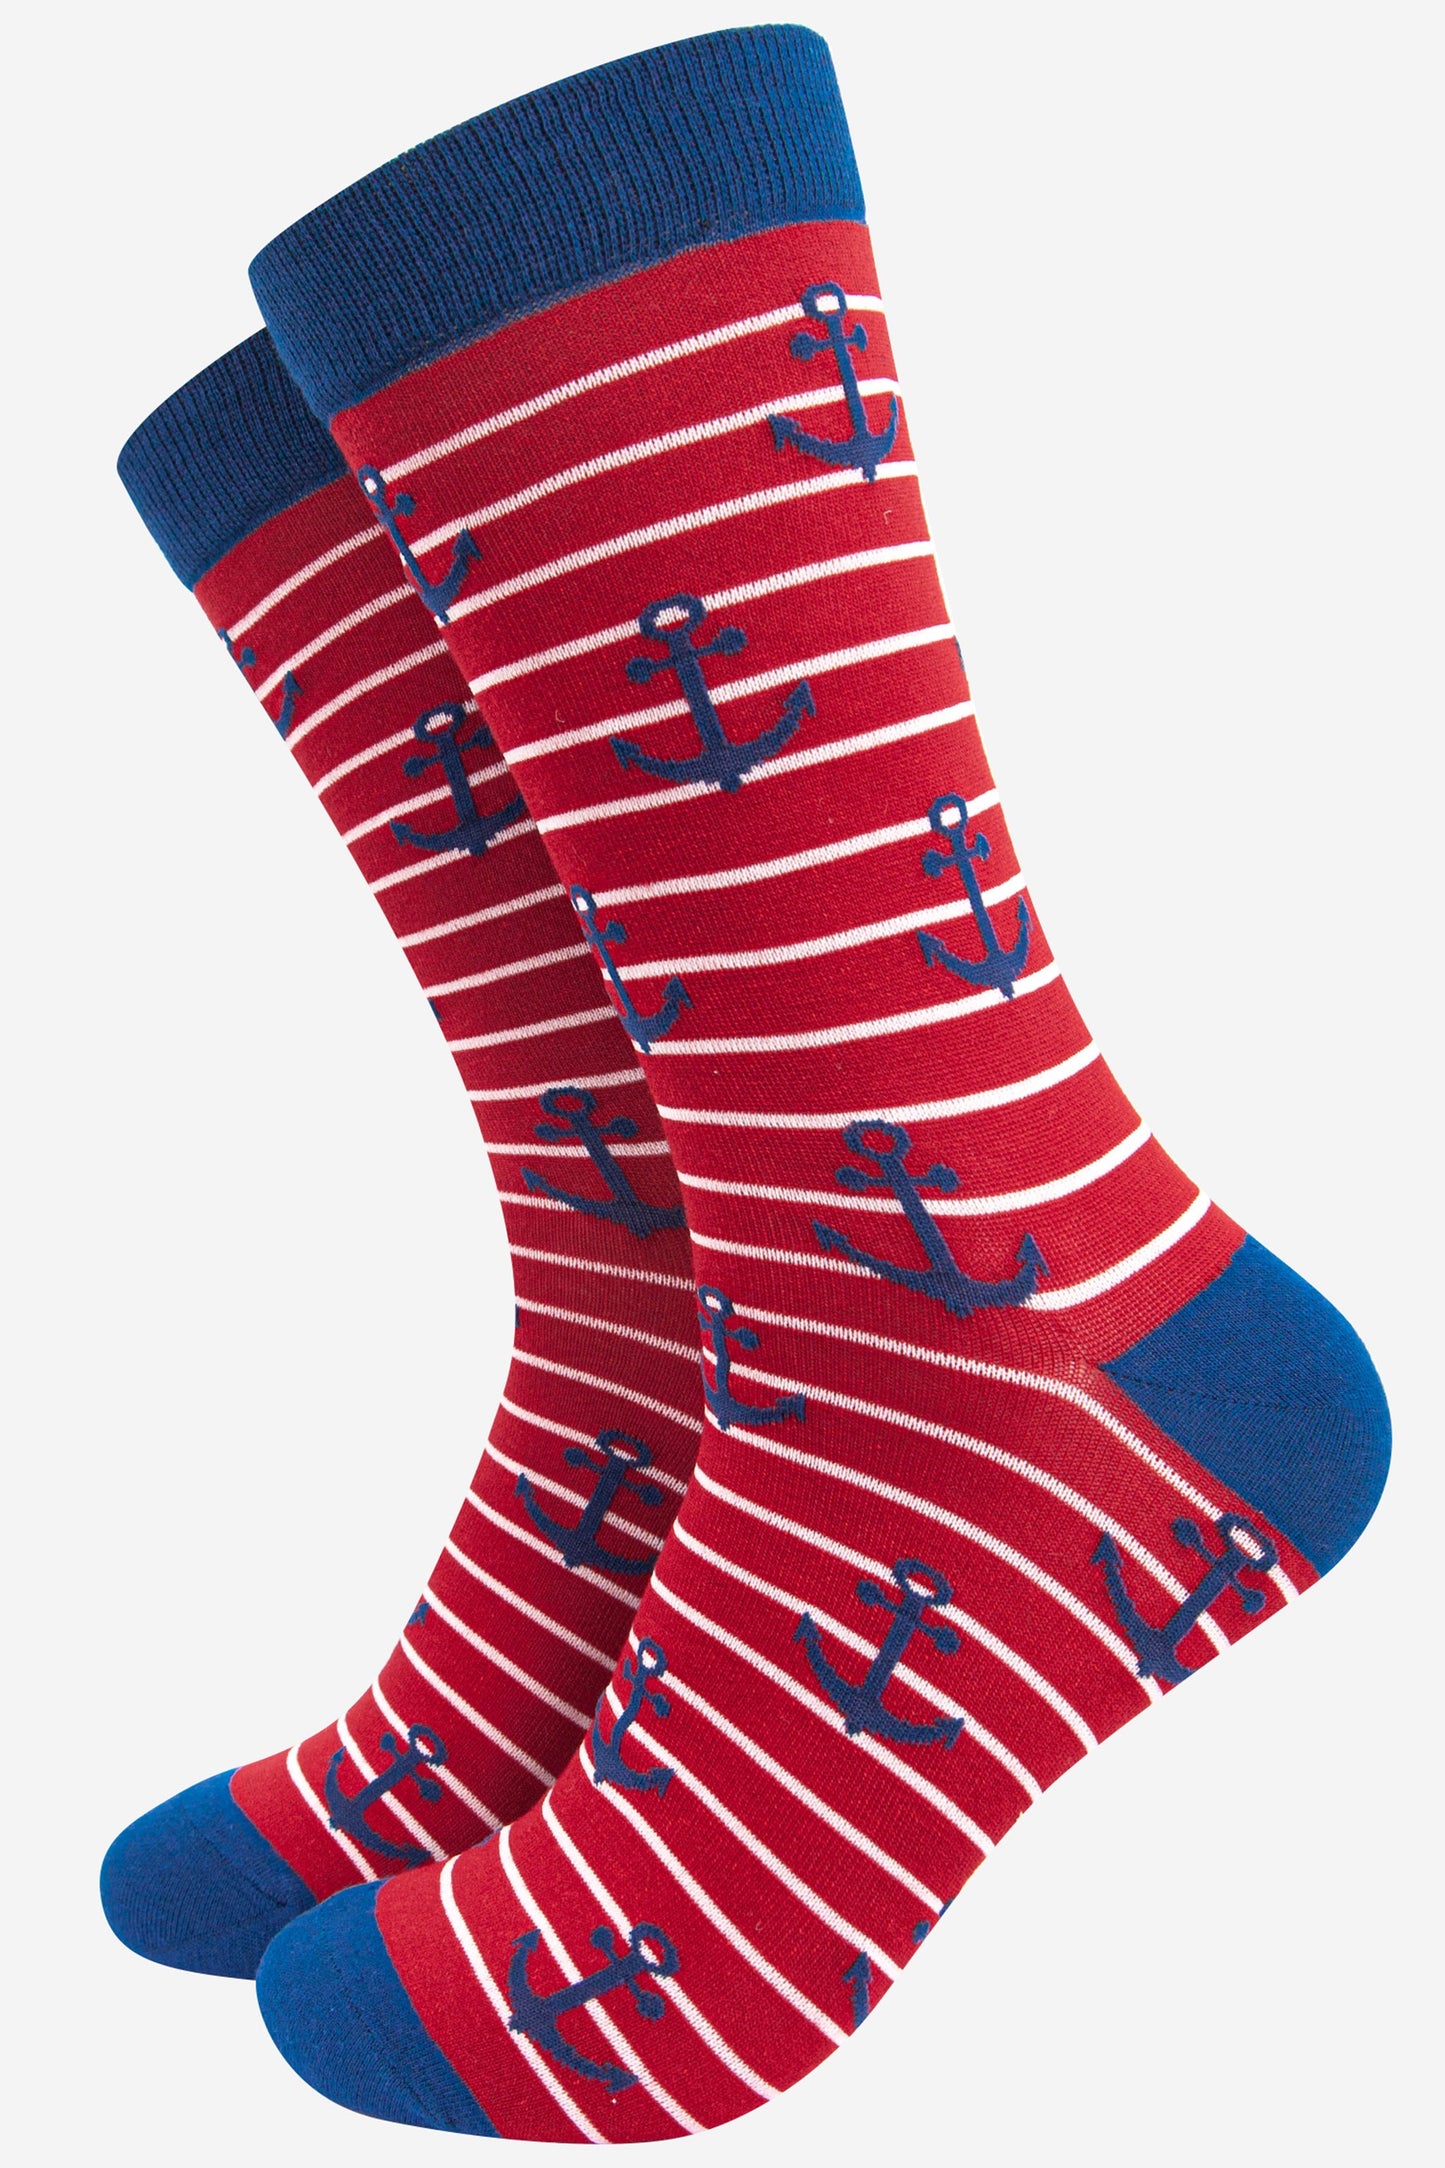 red and white striped bamboo socks with an all over blue anchor pattern 